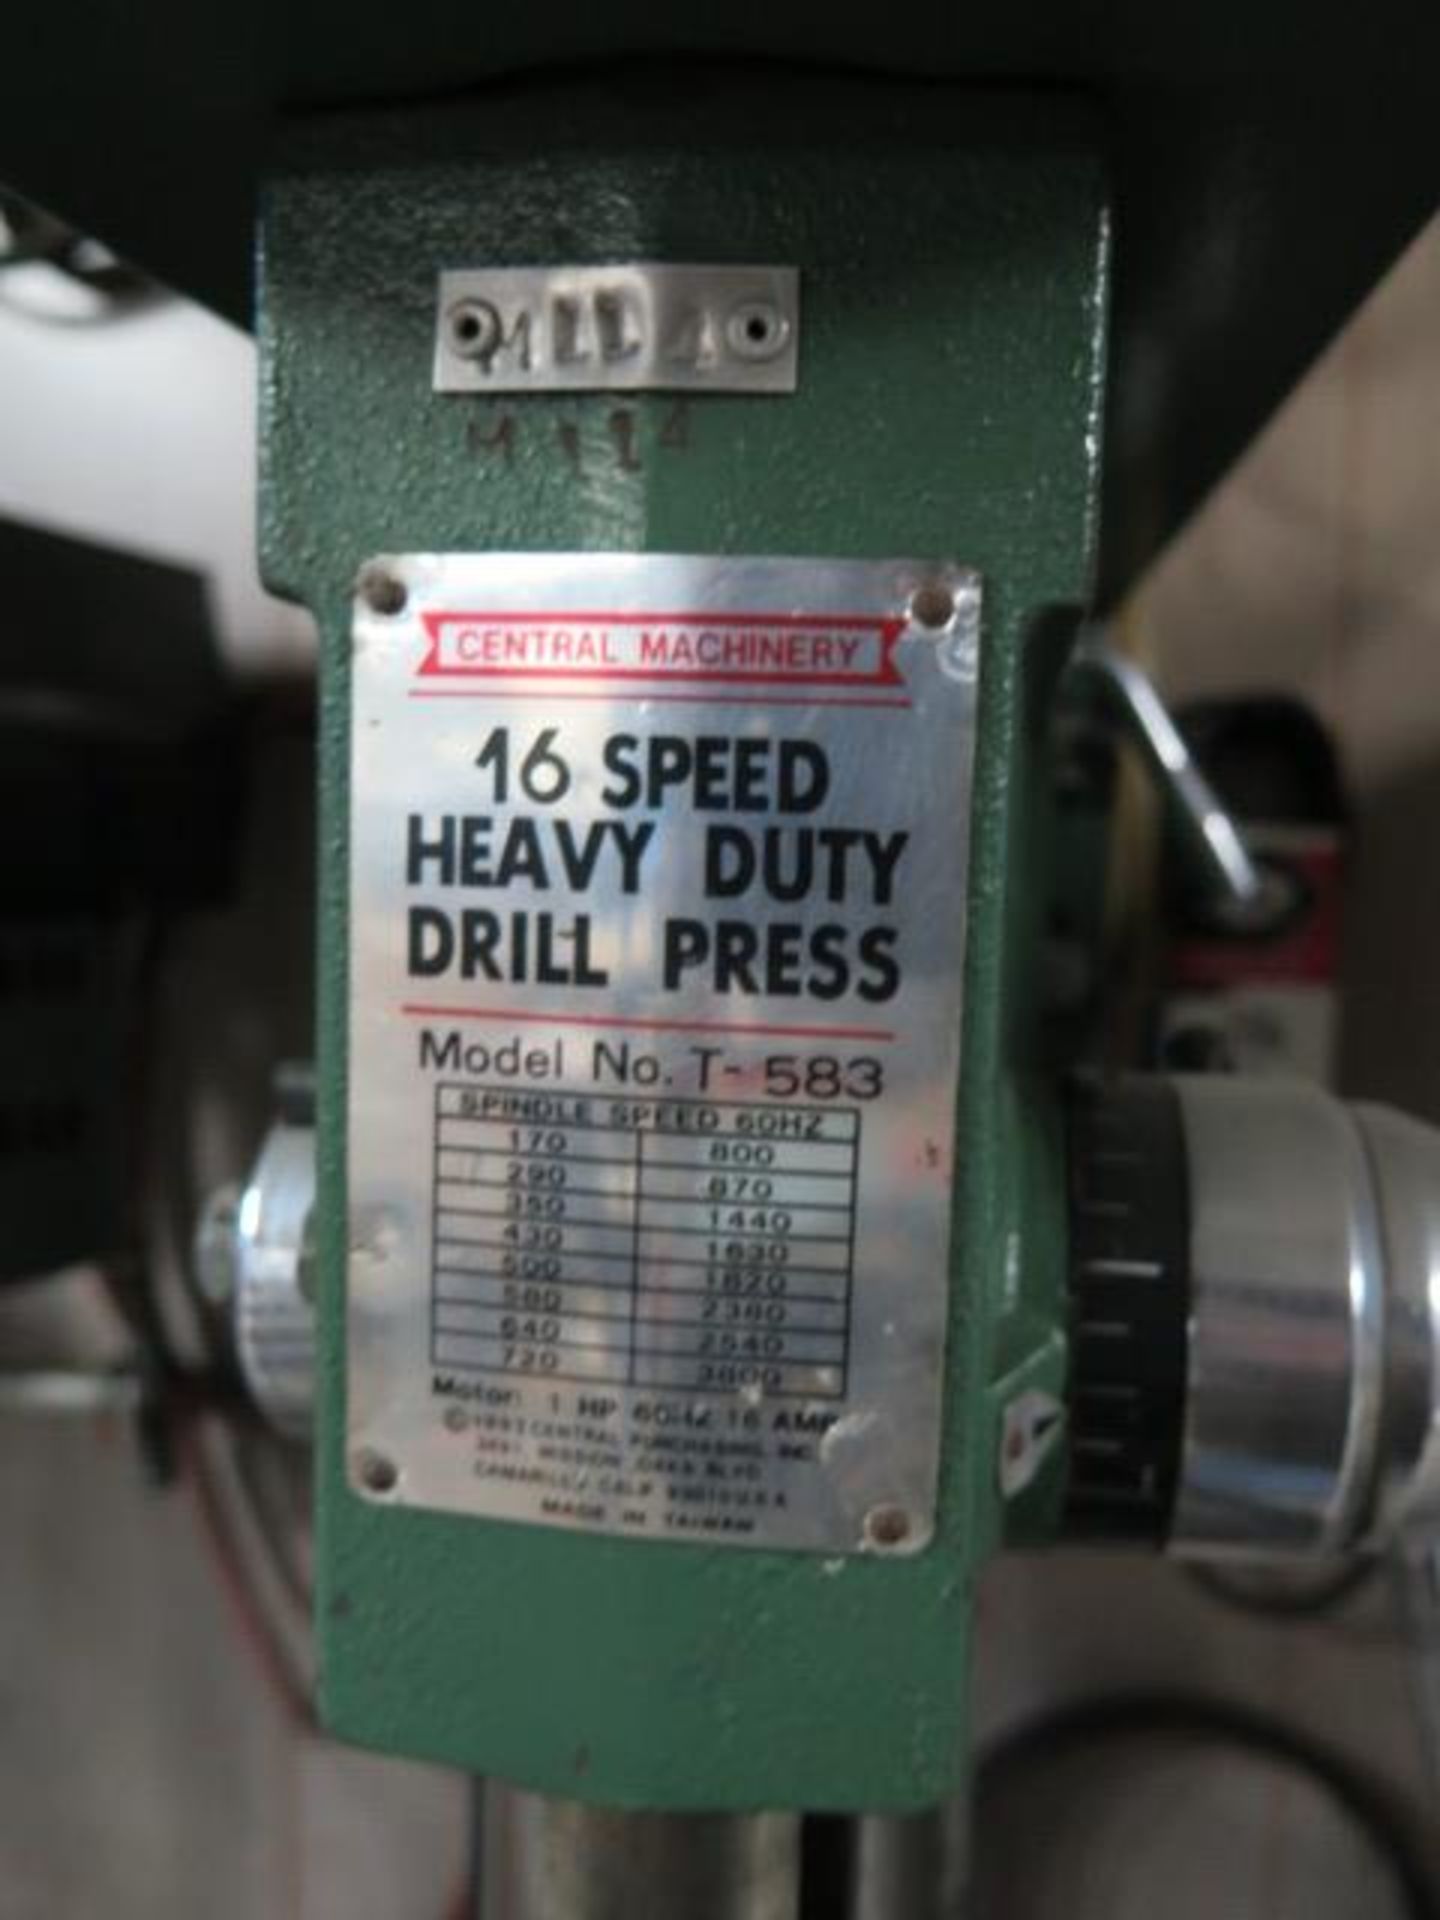 Centra; Machinery 16-Speed Pedestal Drill Press (SOLD AS-IS - NO WARRANTY) - Image 3 of 5